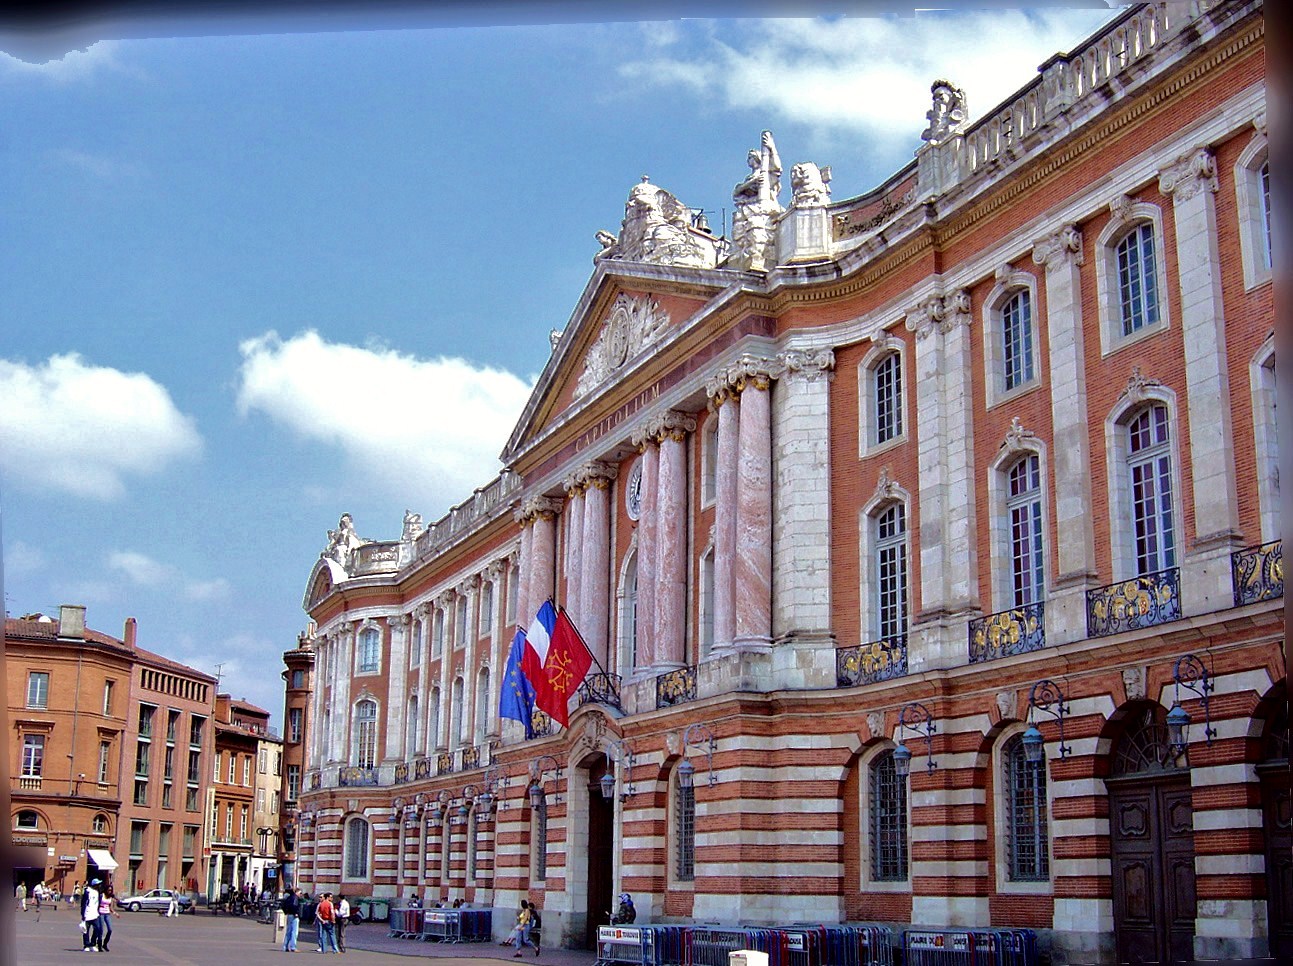 TOULOUSE - THE PINK CITY: The Capitole - Toulouse - France